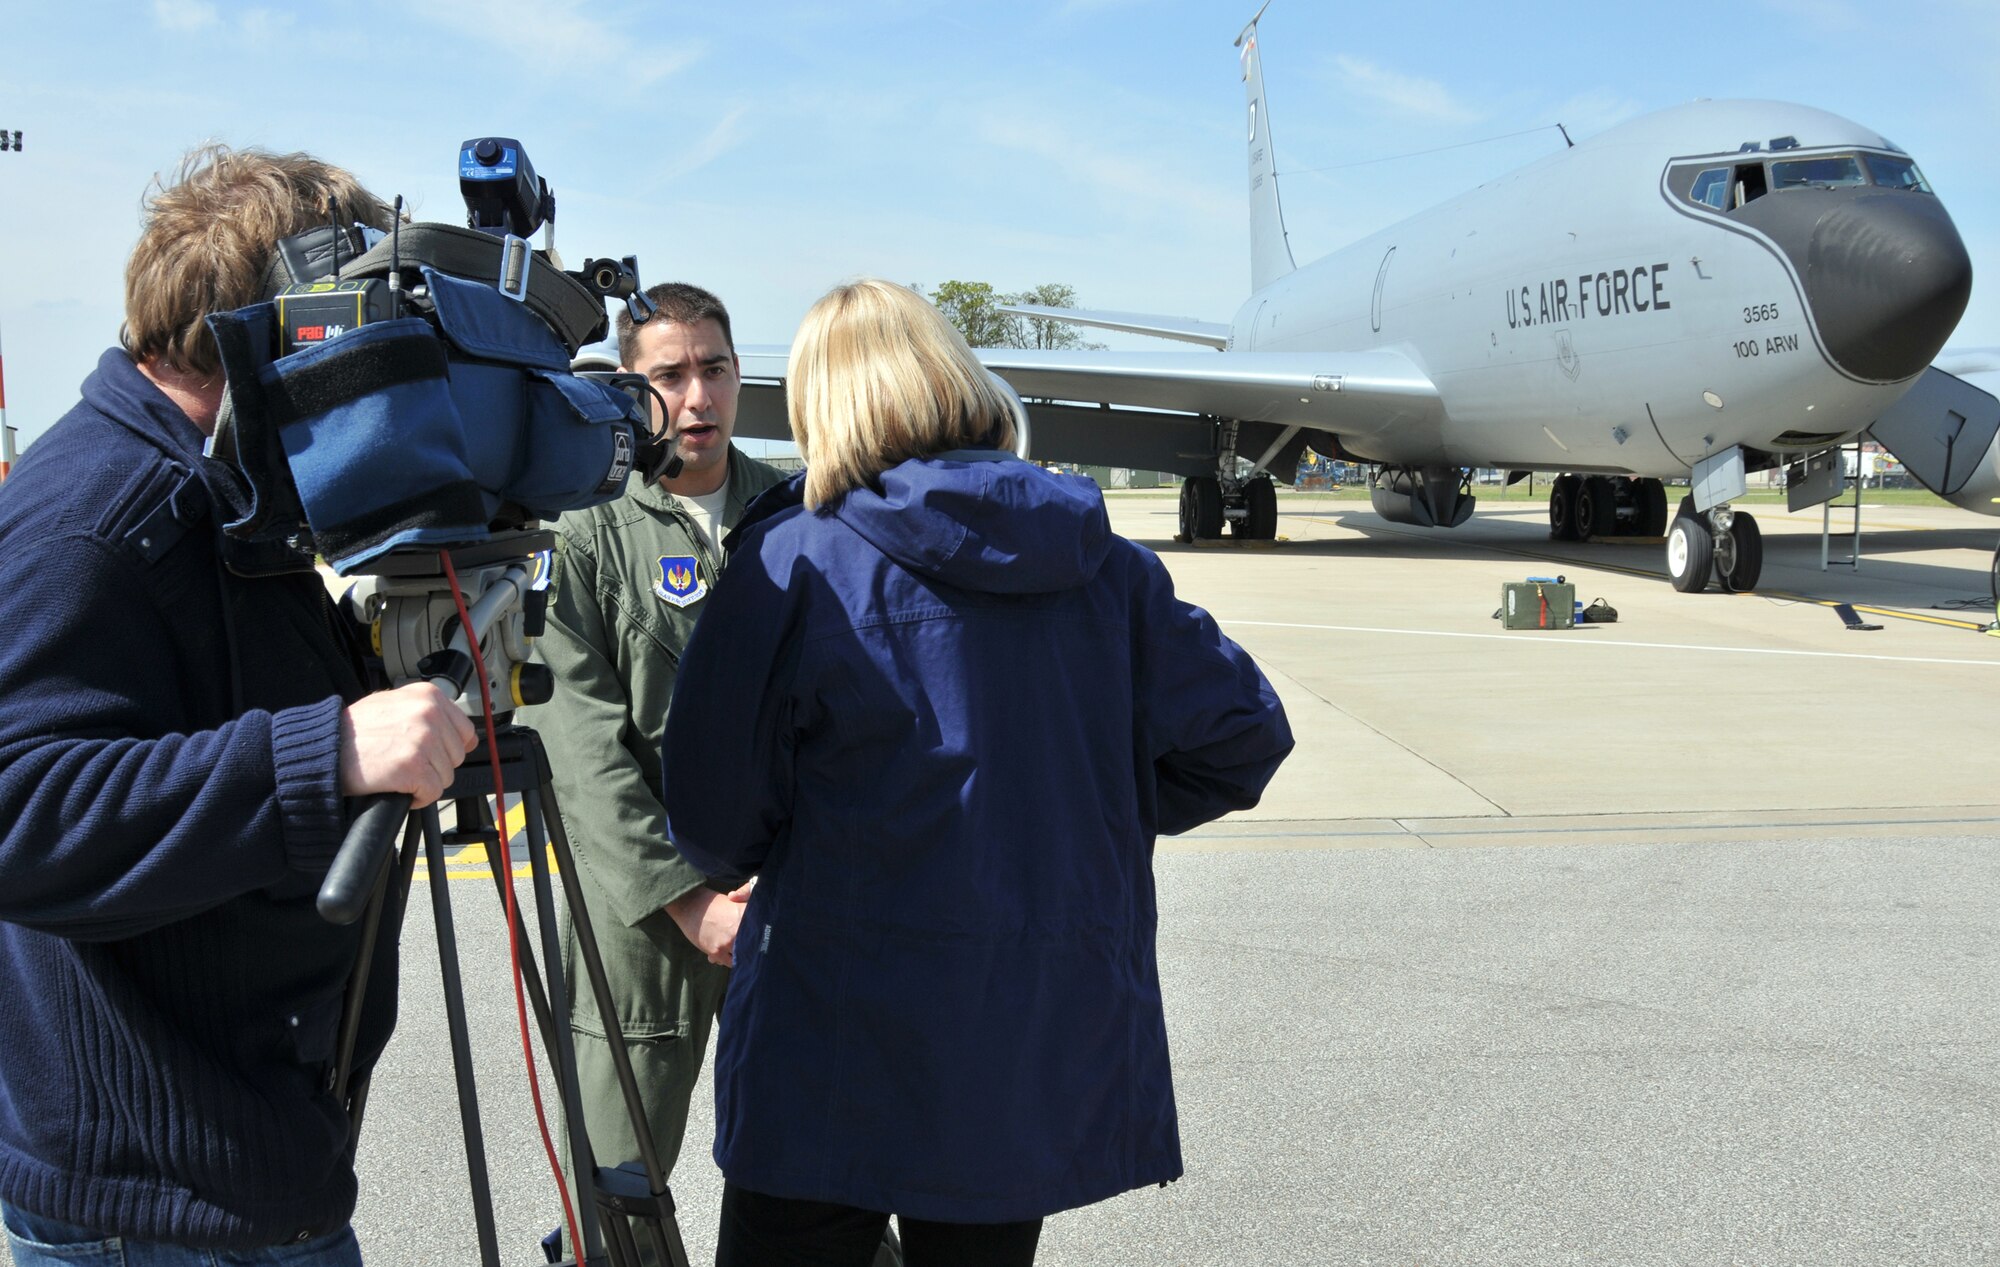 RAF MILDENHALL, England - Capt. Jonathan Uhler, 351st Air Refueling Squadron aircraft commander, is interviewed by a local television crew here after flying them during a real-world air-to-air refueling mission over the coast of England April 27. In addition to supporting 100th Air Refueling Wing and 48th Fighter Wing training requirements, this mission also supported the 100th ARW Public Affairs Media Flight Program which allows reporters to get a detailed look at the heart of the base mission and enable them to make balanced decisions in the course of their community work. (U.S. Air Force photo/Tech. Sgt. Kevin Wallace)